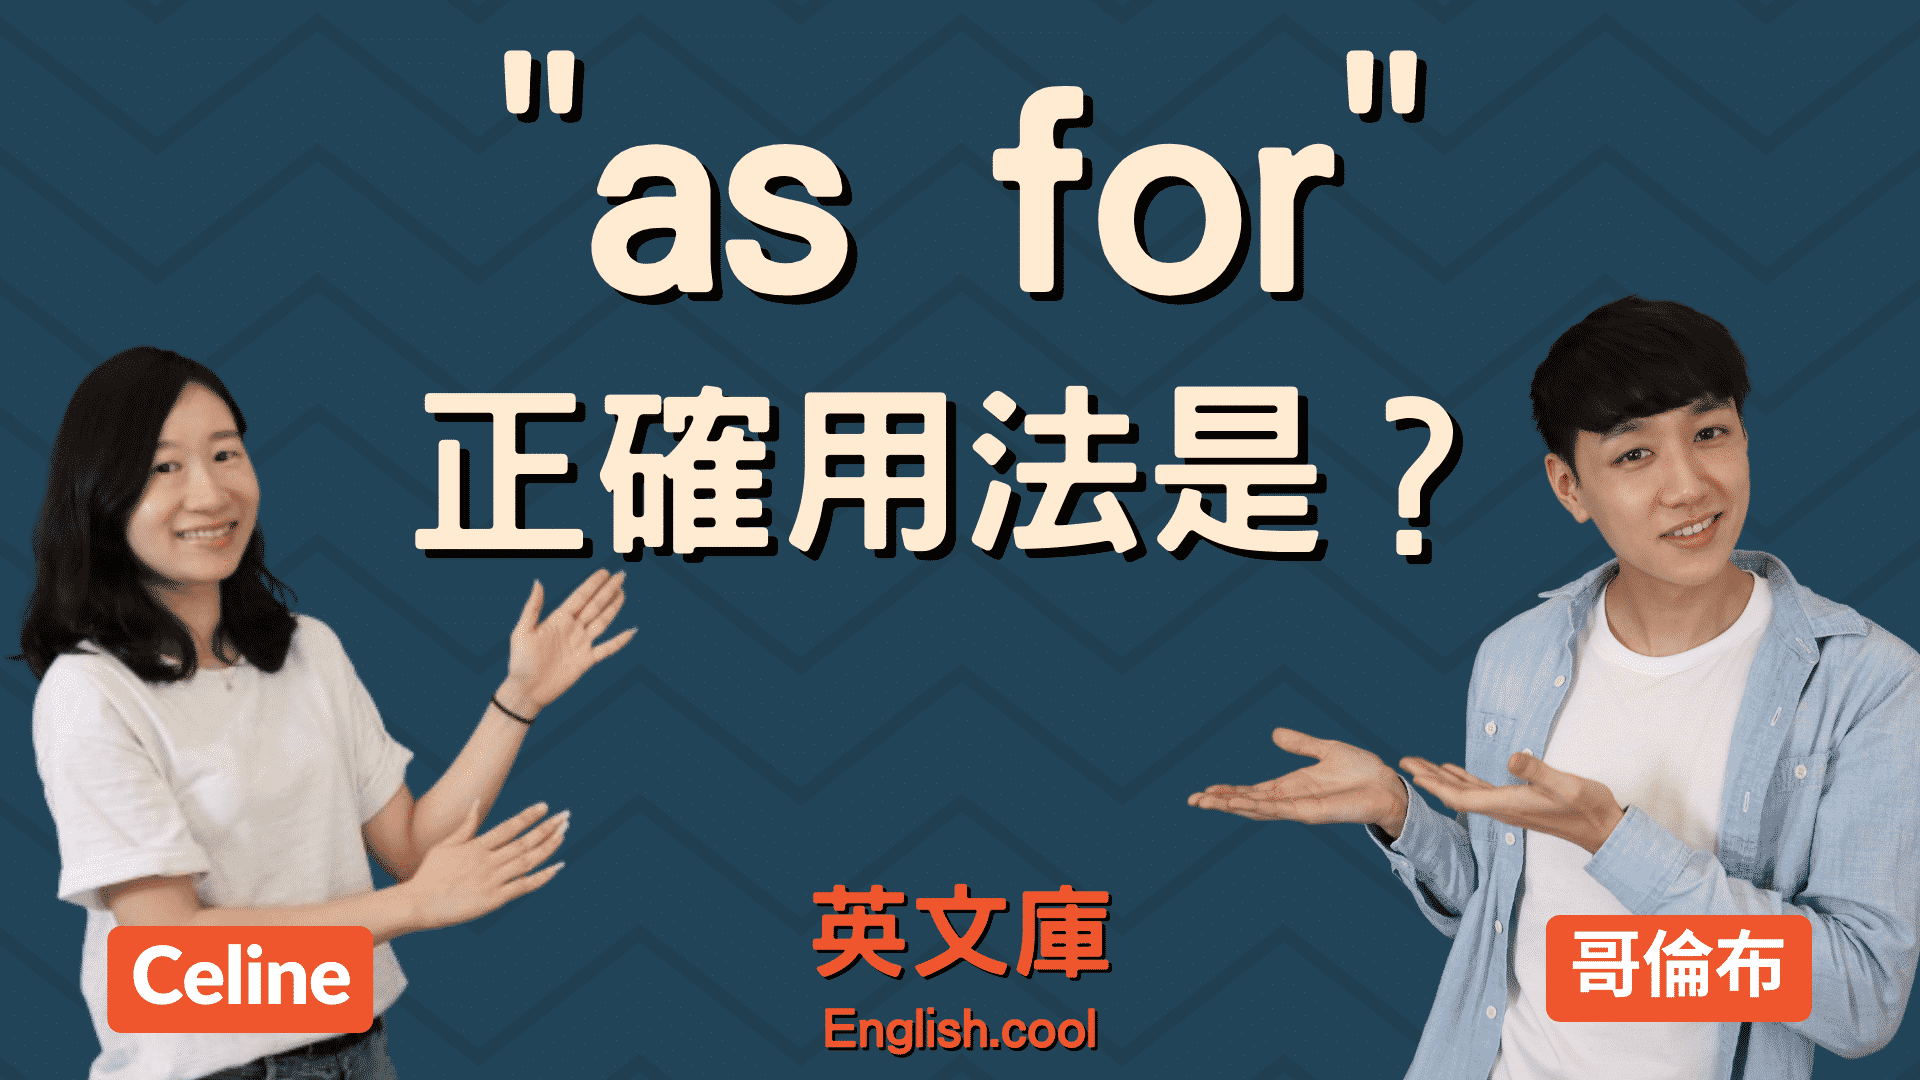 You are currently viewing 「as for」正確用法是？跟 as to 差在哪？